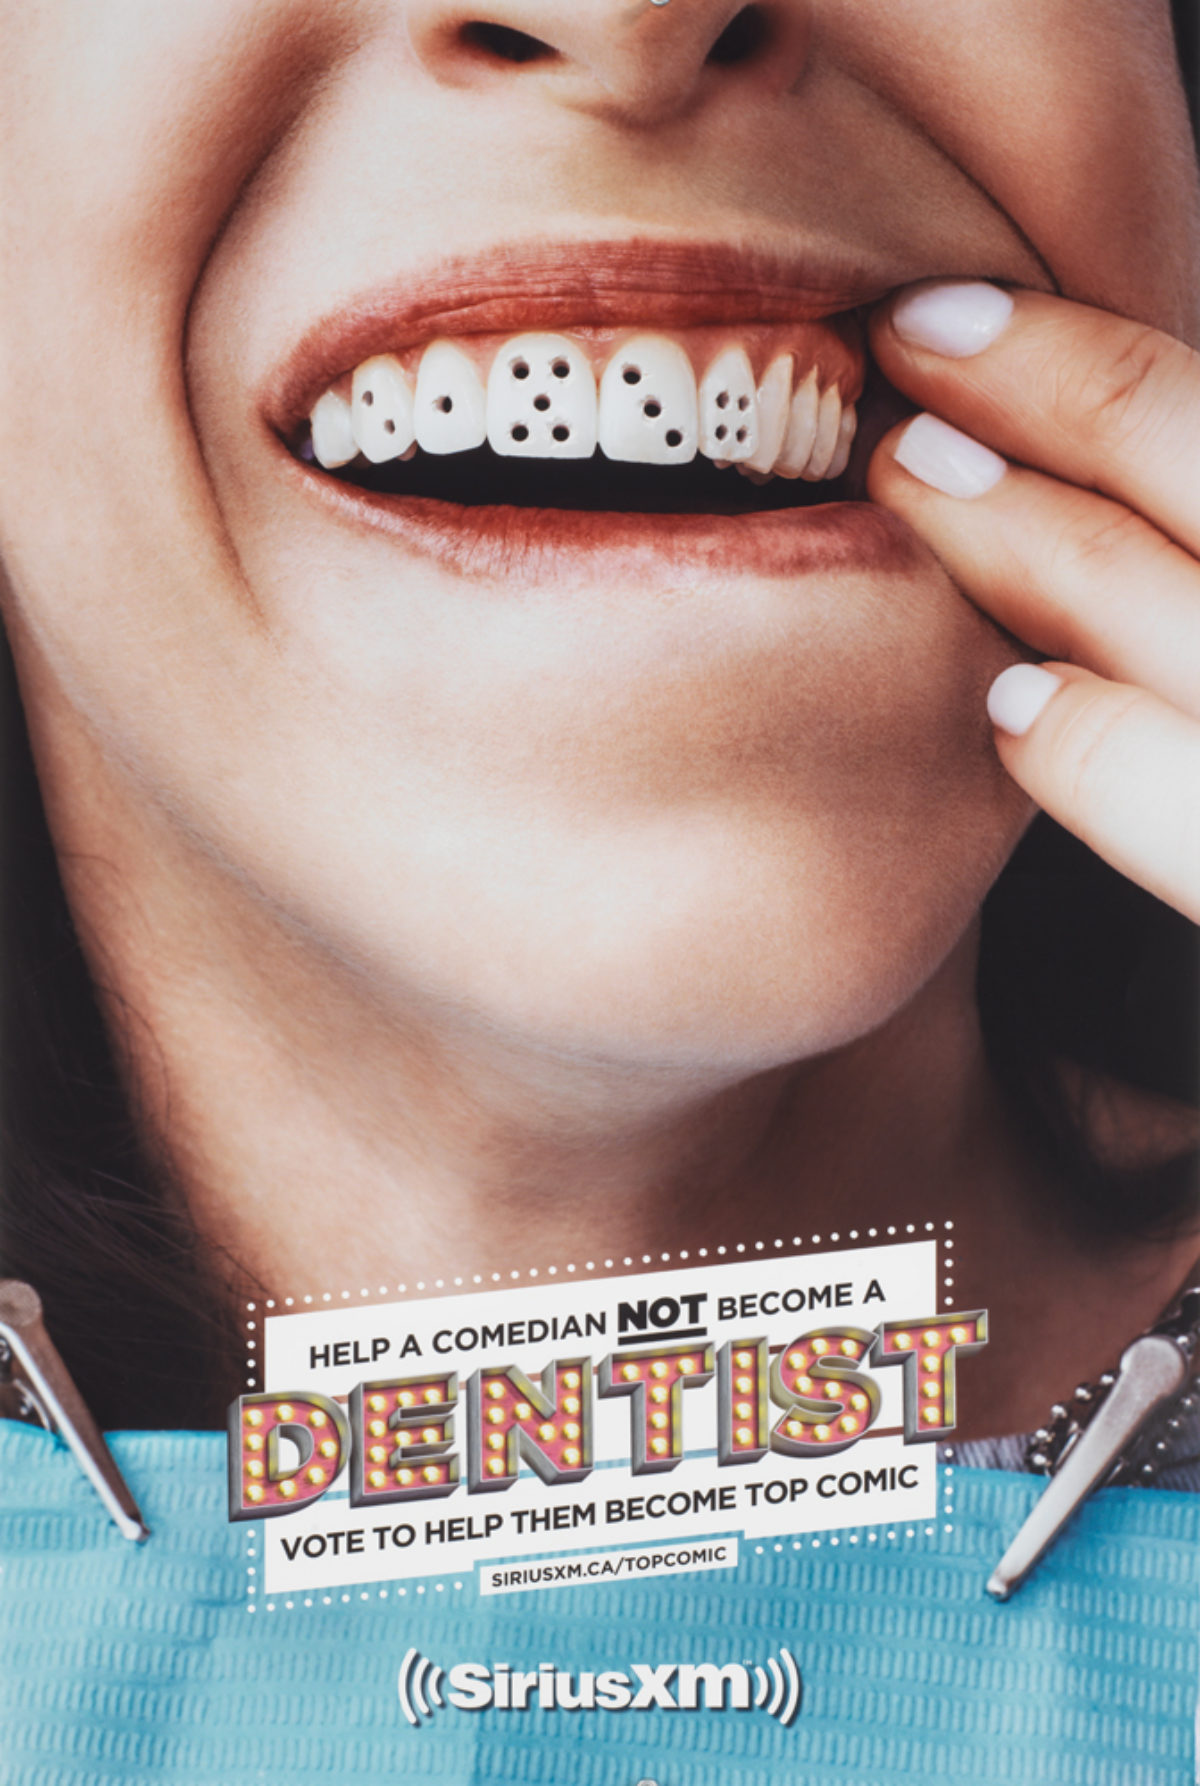 A poster of someone opening their mouth as 5 teeth have holes similar to spots on dice.